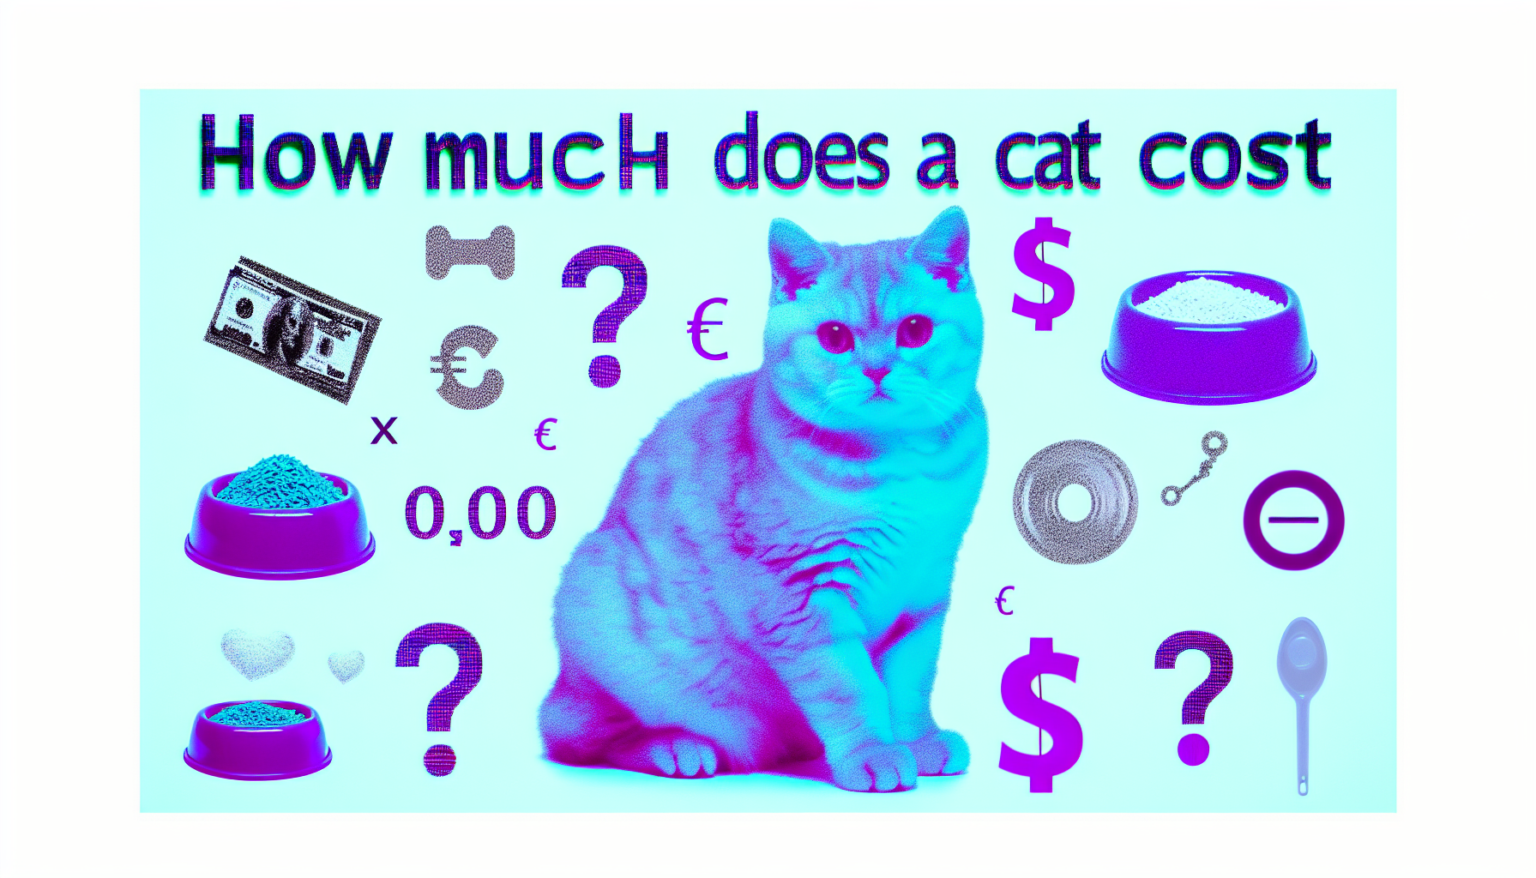 Pawtounes - Chats - Chatons - Animaux - Mignons - Marrants : The price of a cat: How much does it really cost?